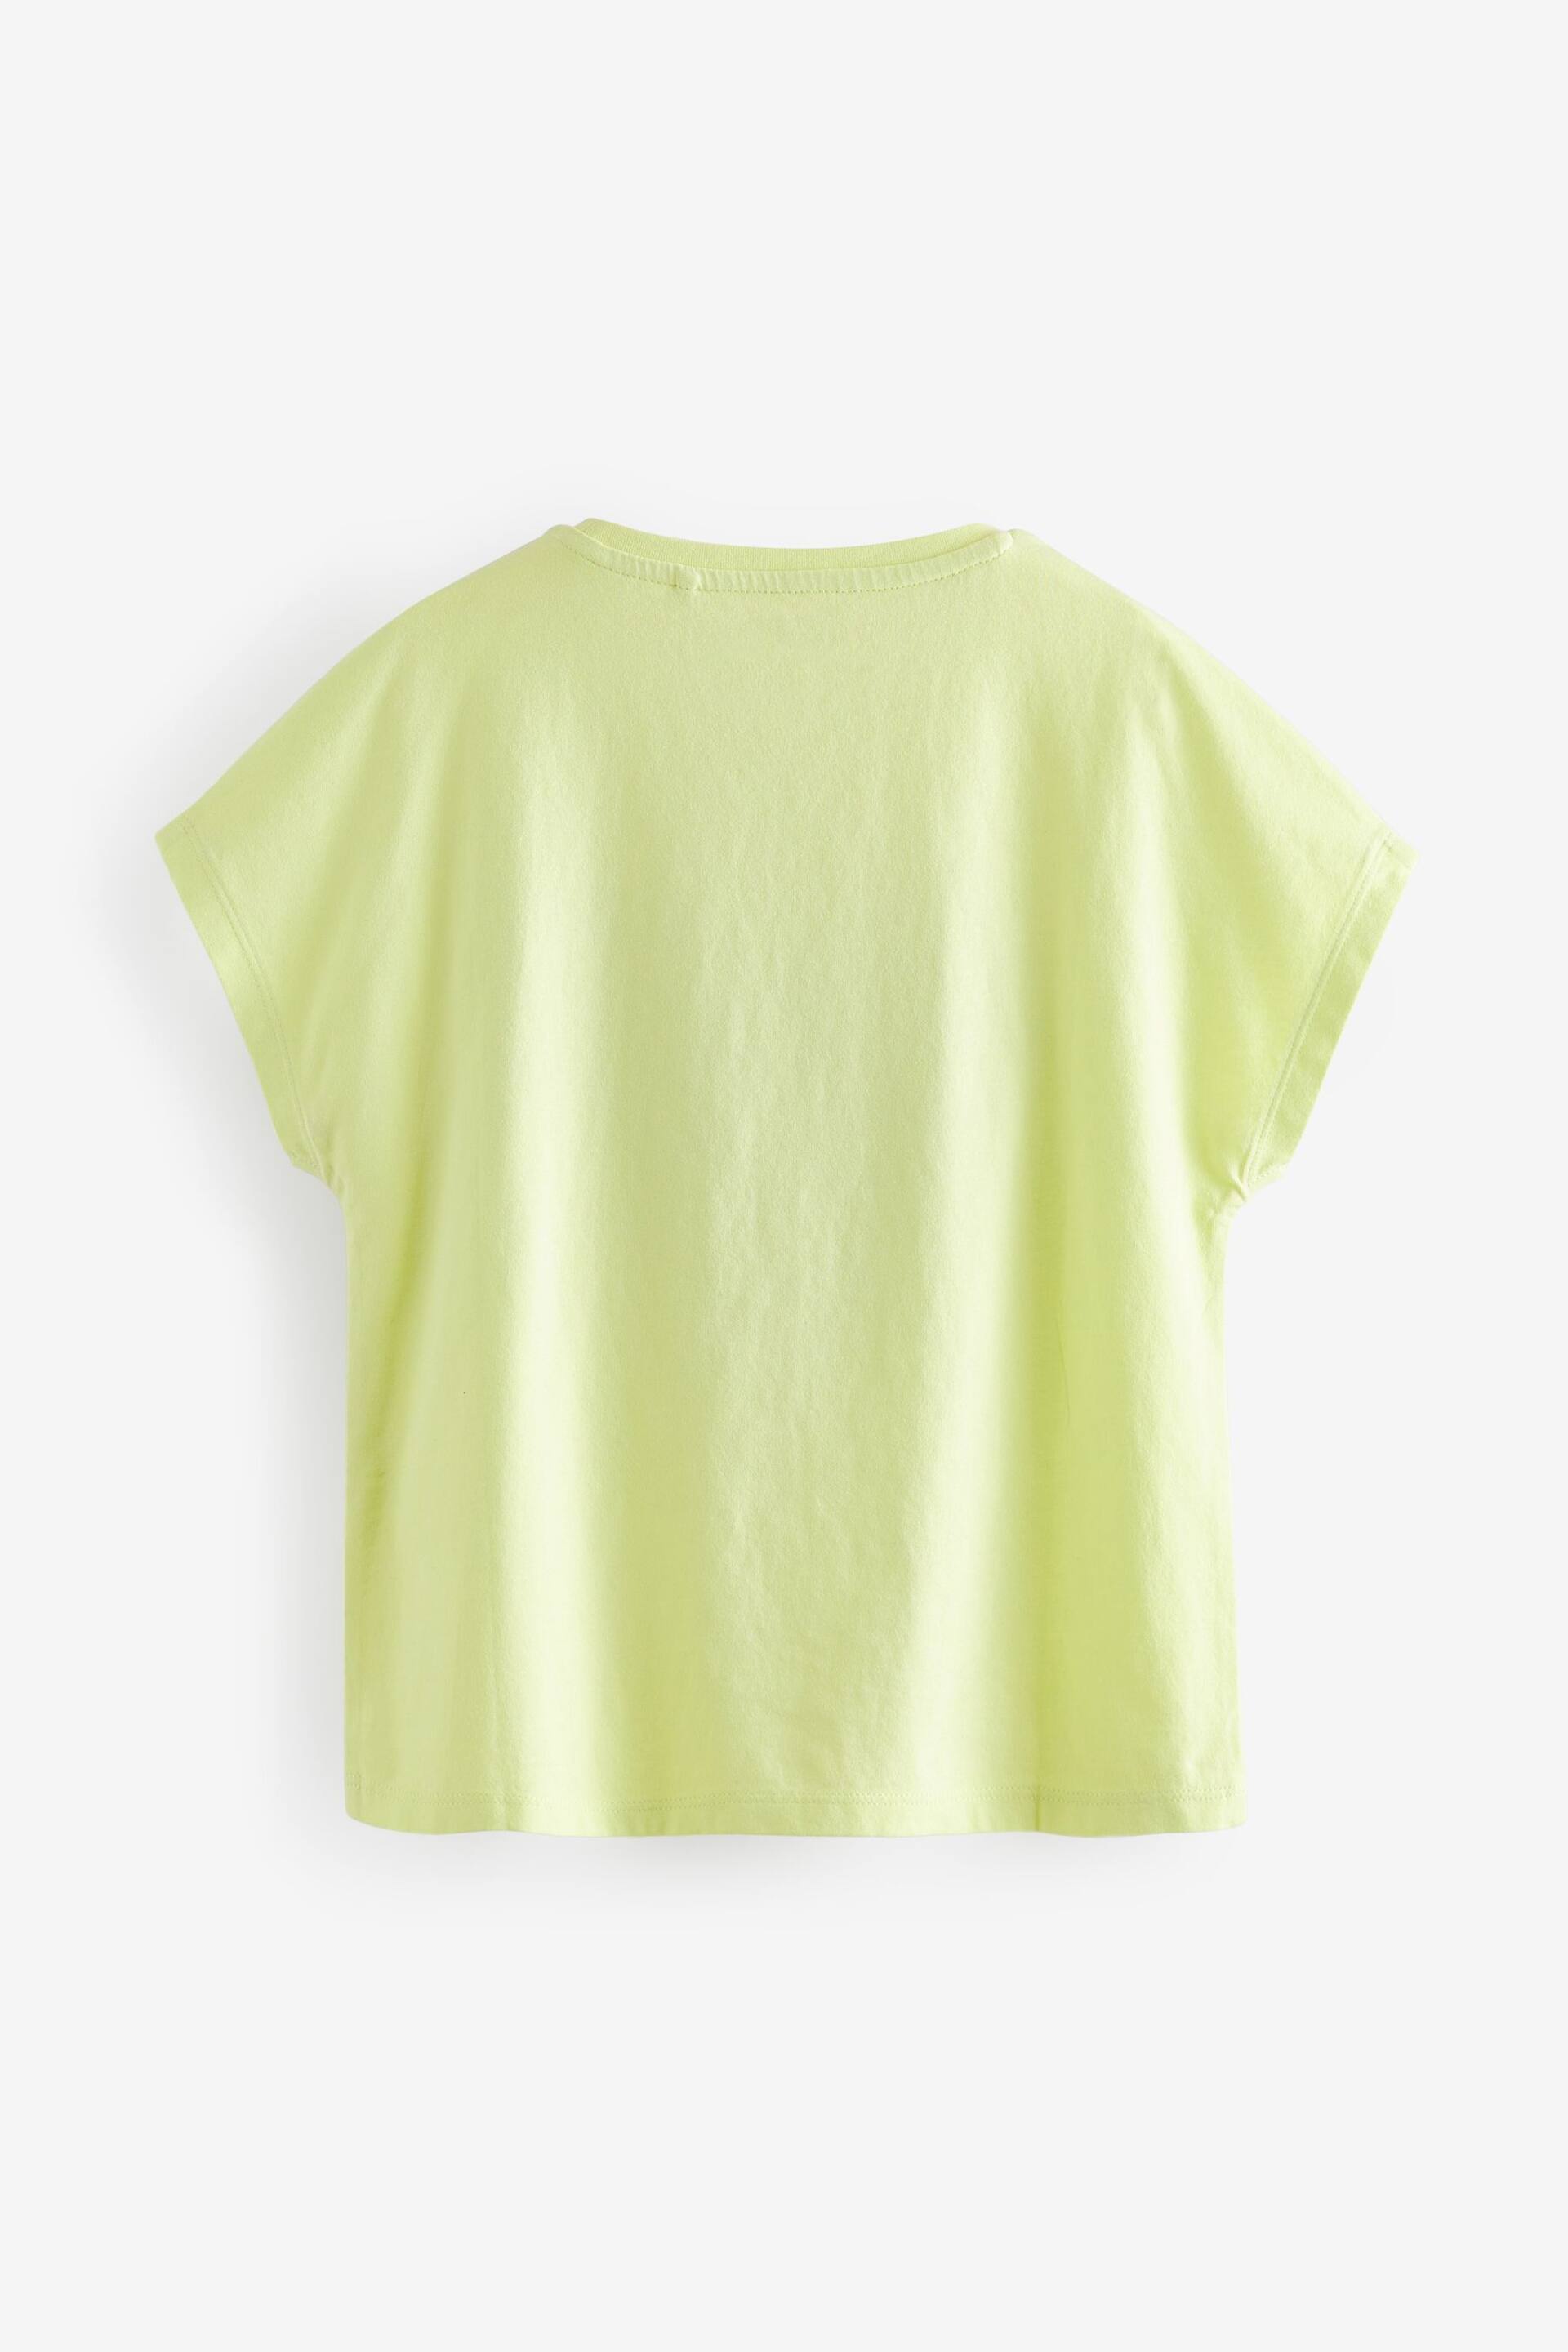 Lime Green Heart Sequin T-Shirt (3-16yrs) - Image 6 of 7